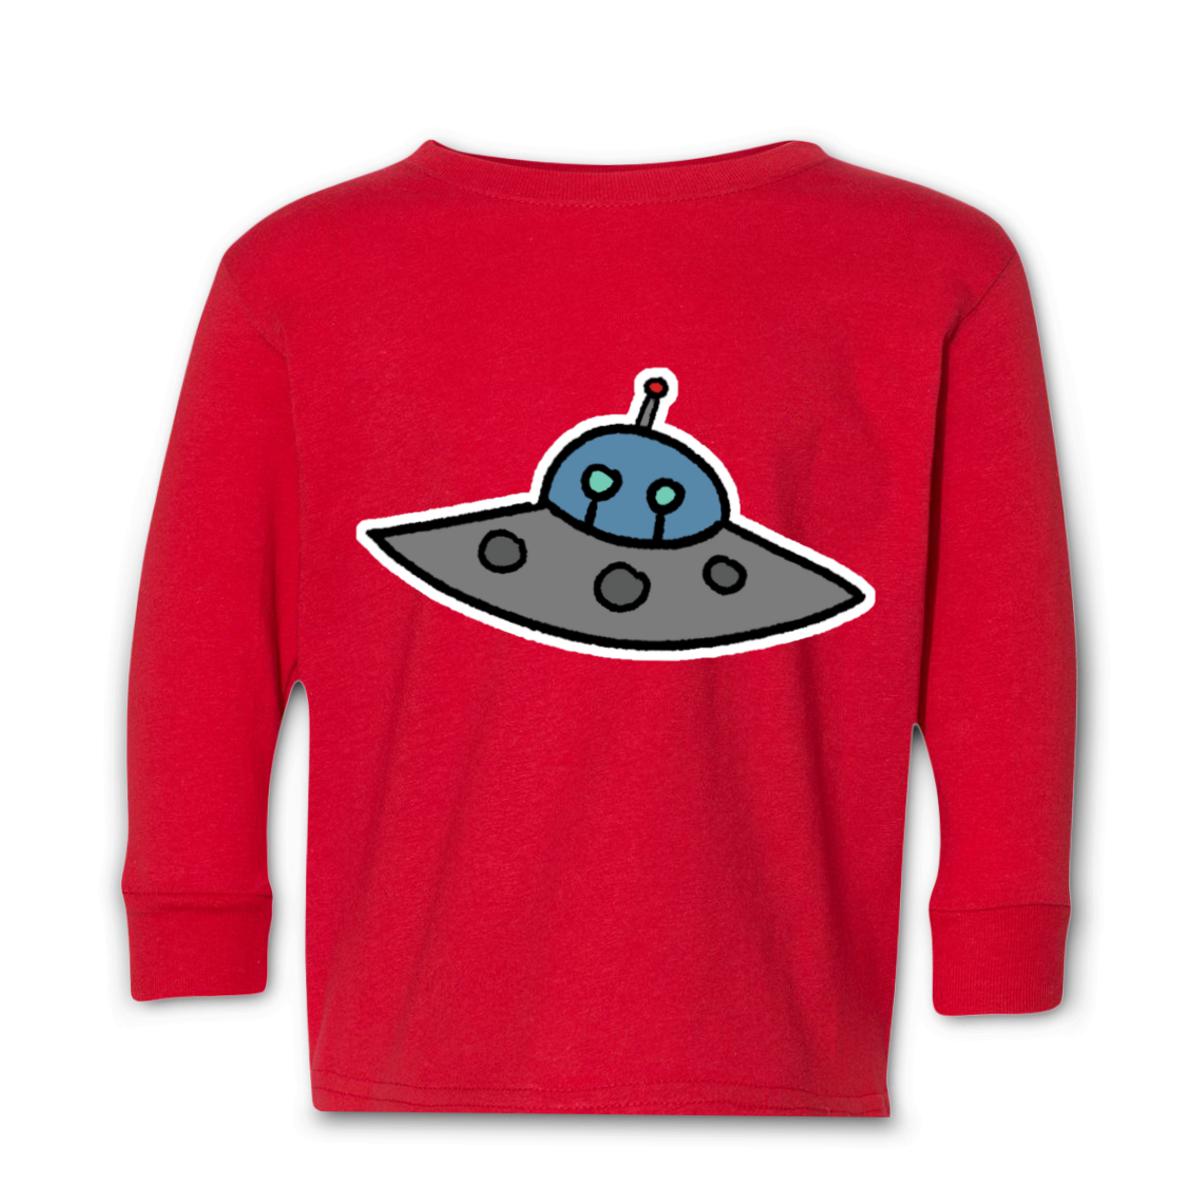 Flying Saucer Toddler Long Sleeve Tee 4T red